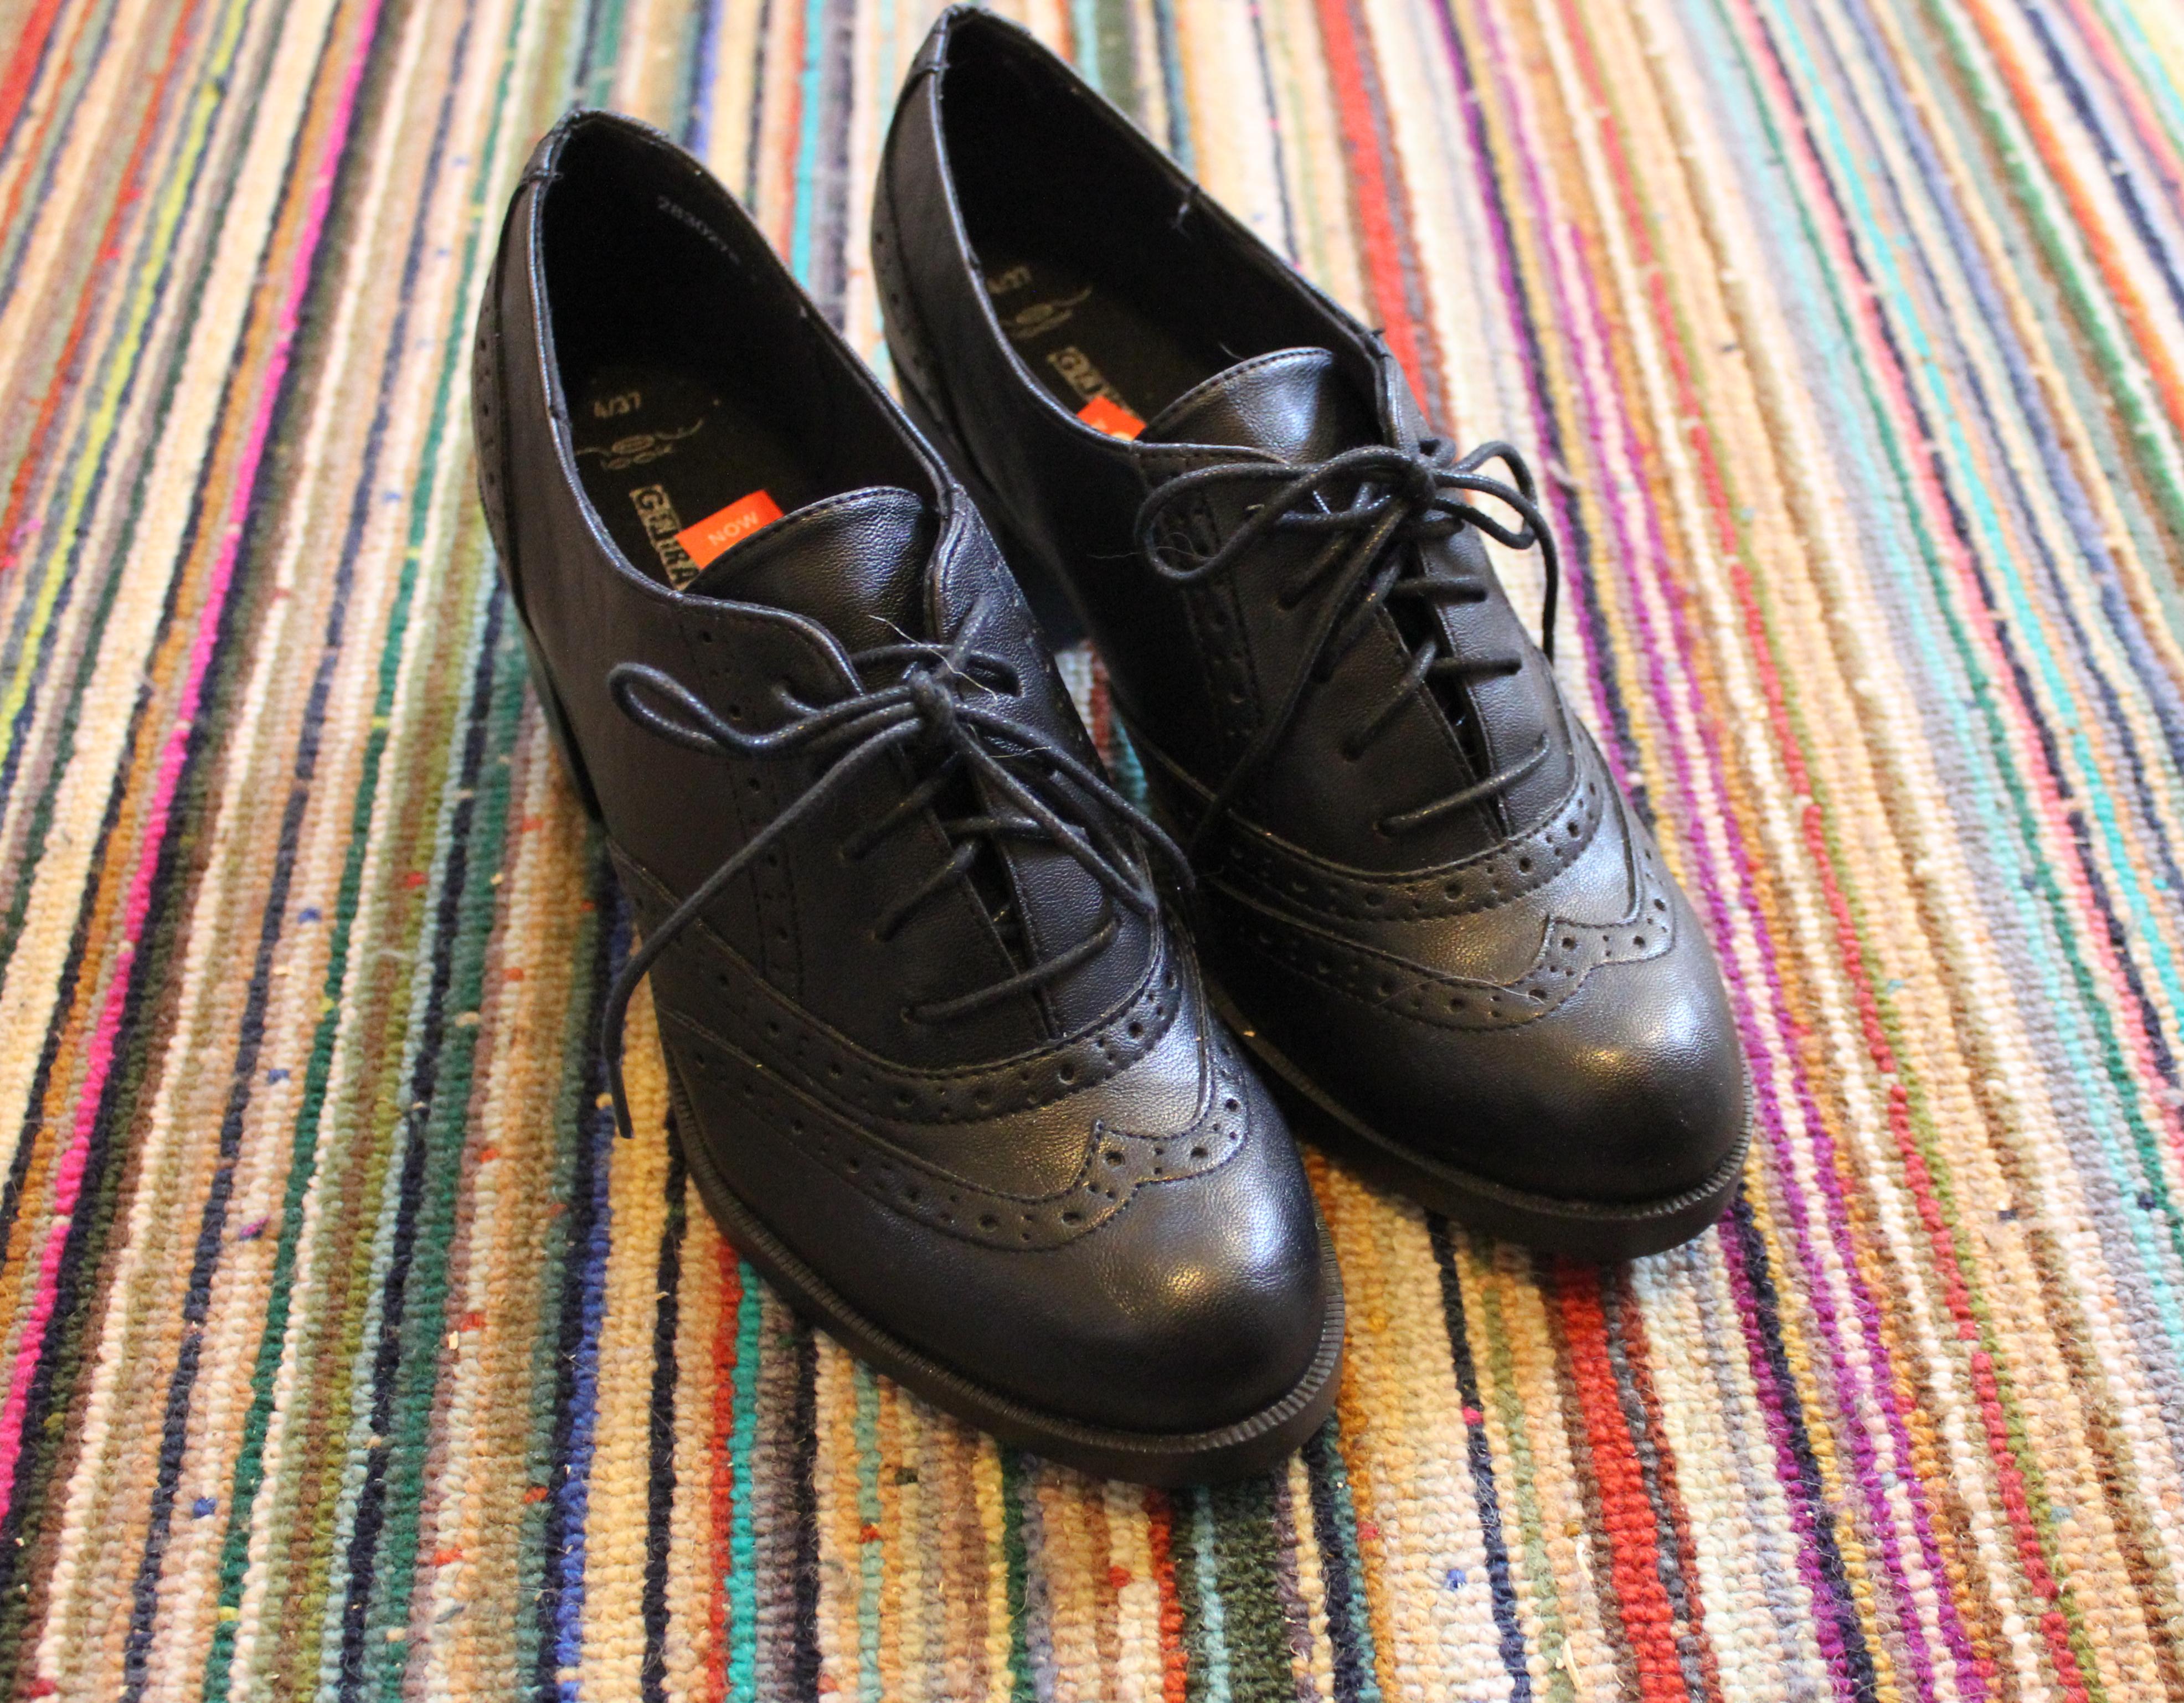 tuesday shoesday back to school shoes from new look